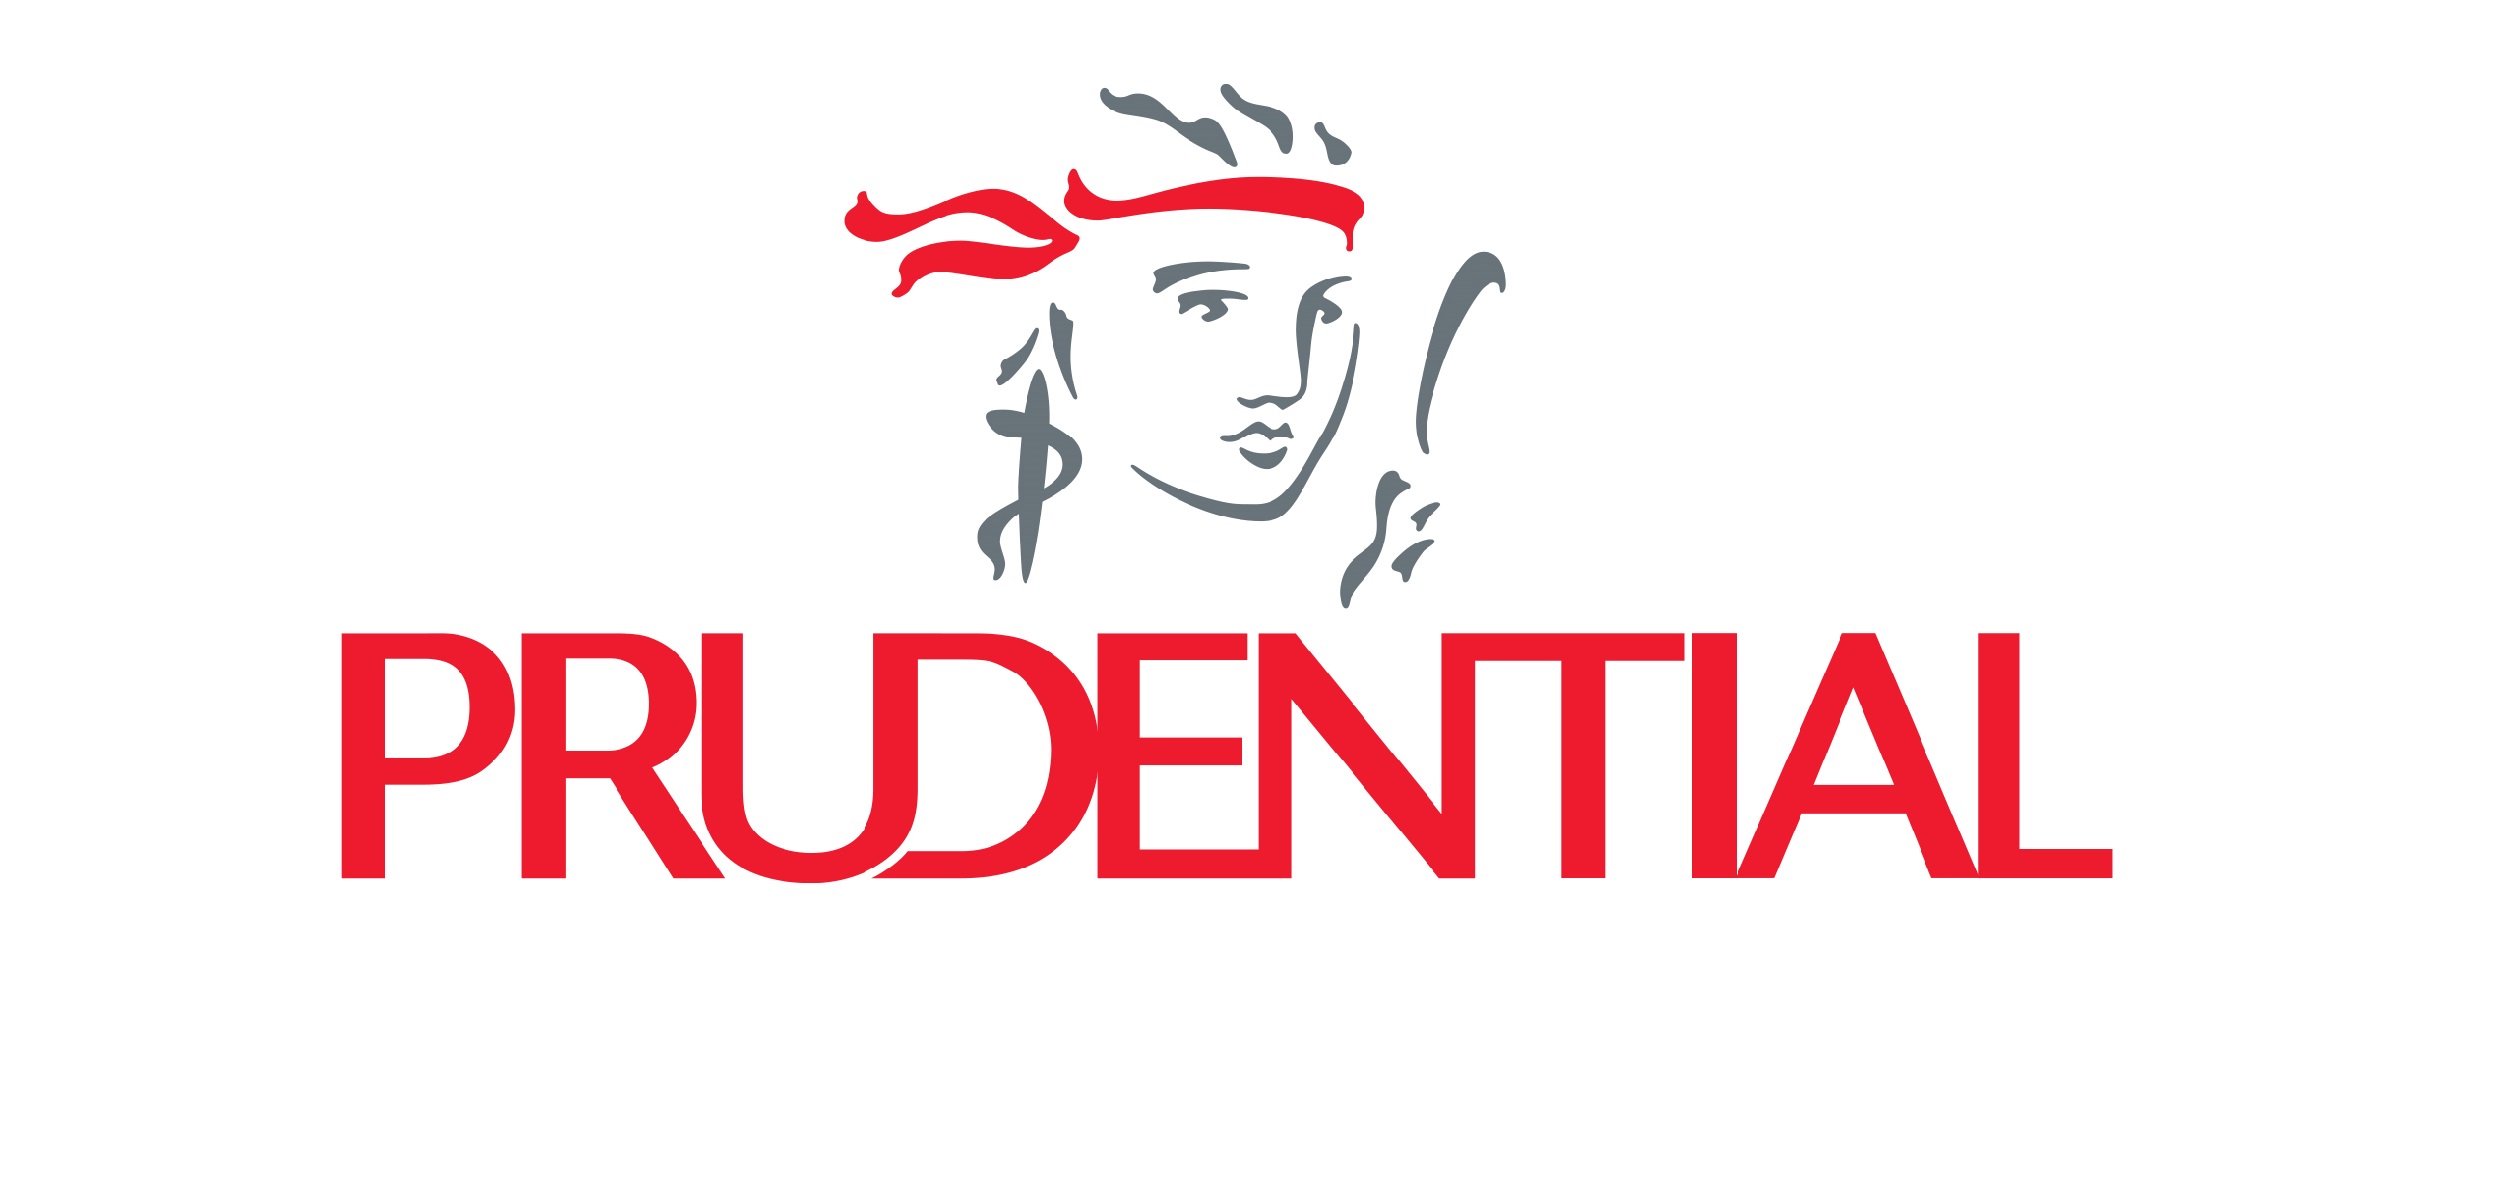 Prudential Việt Nam Tuyển Dụng Thực Tập Sinh Operational Risk Full-time